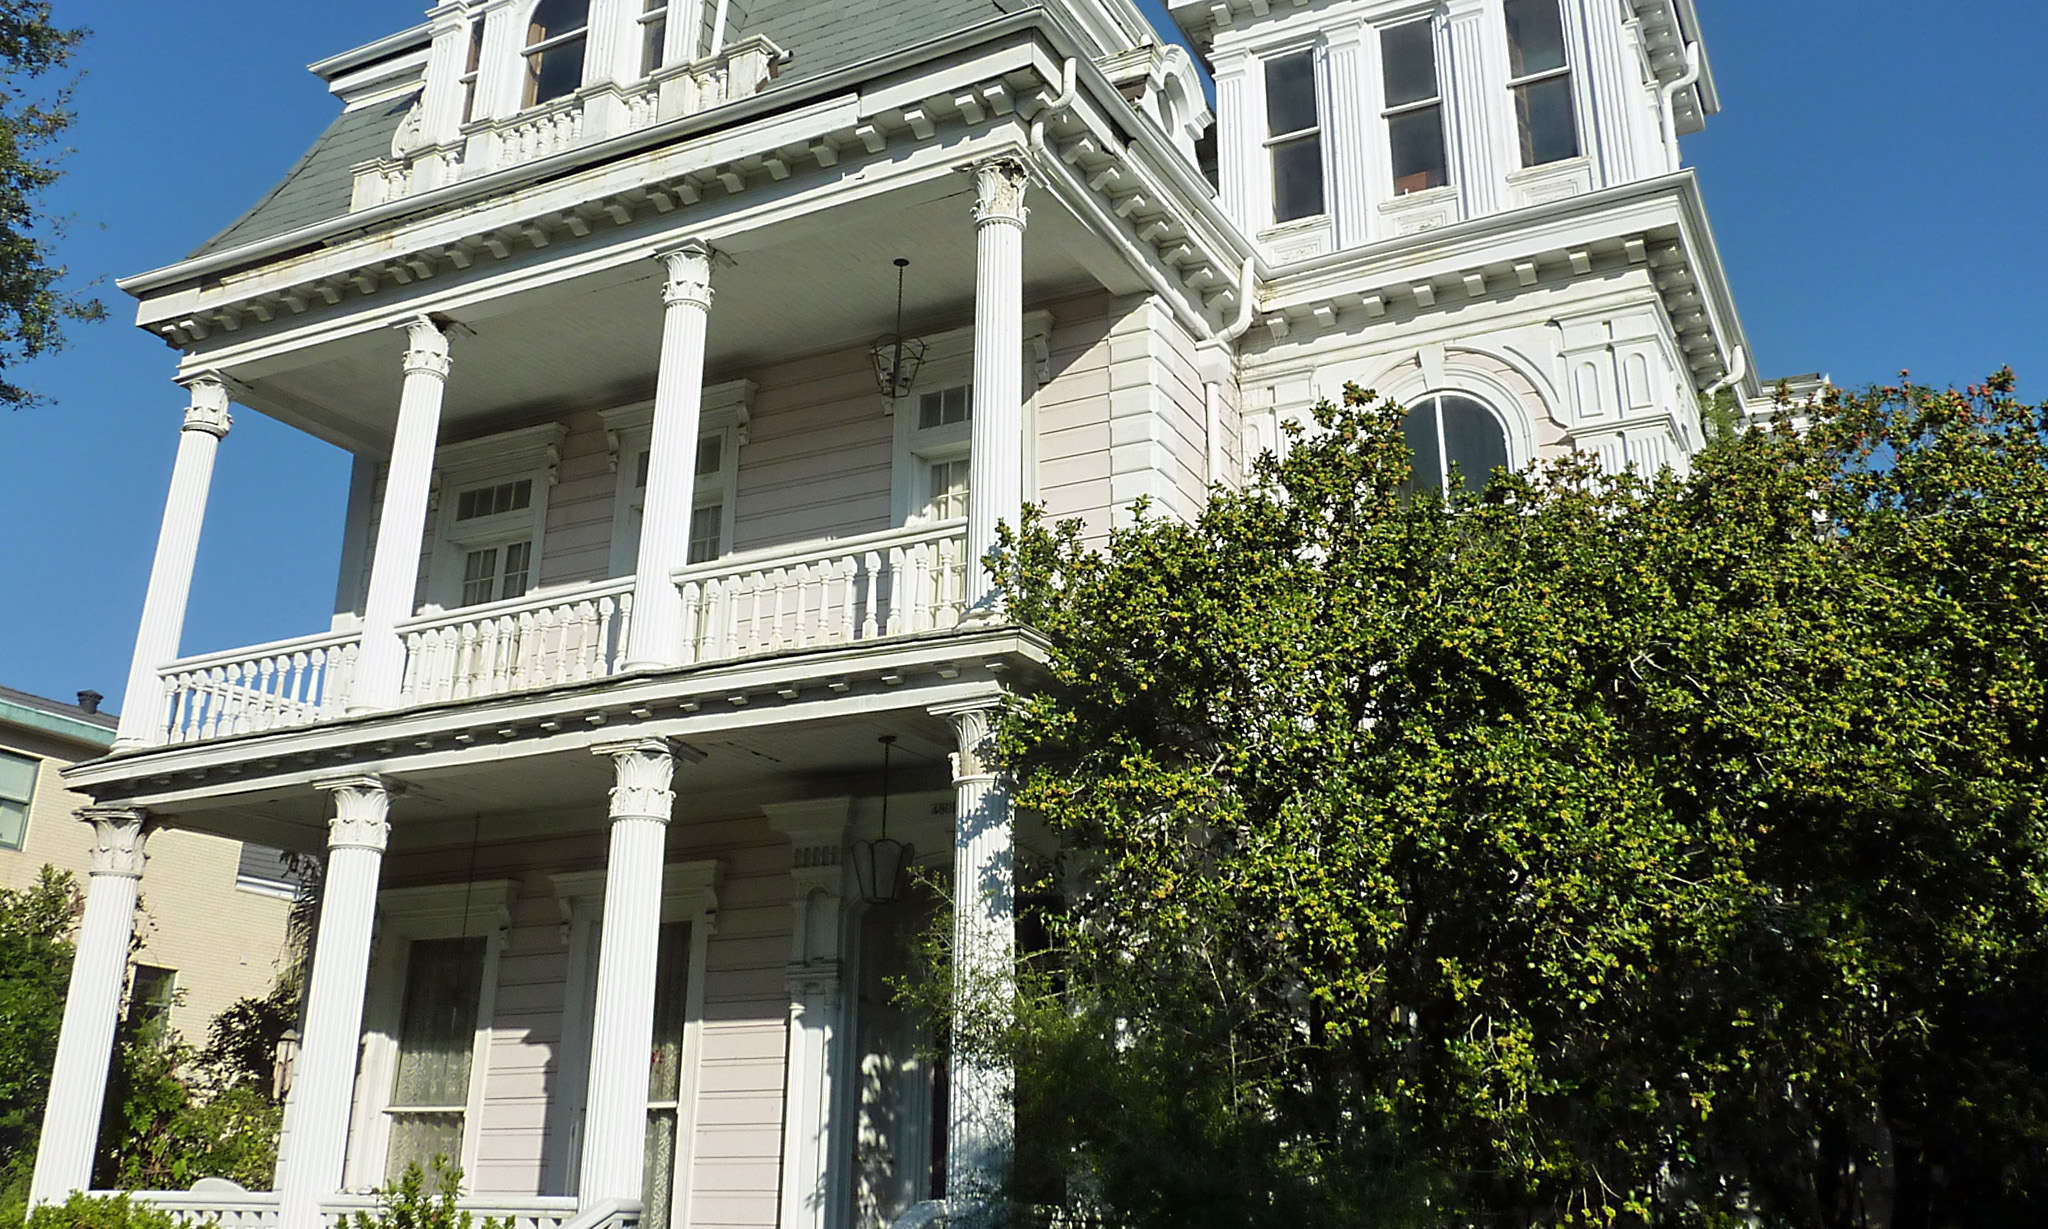 Architecture Tours In The Garden District New Orleans Get The